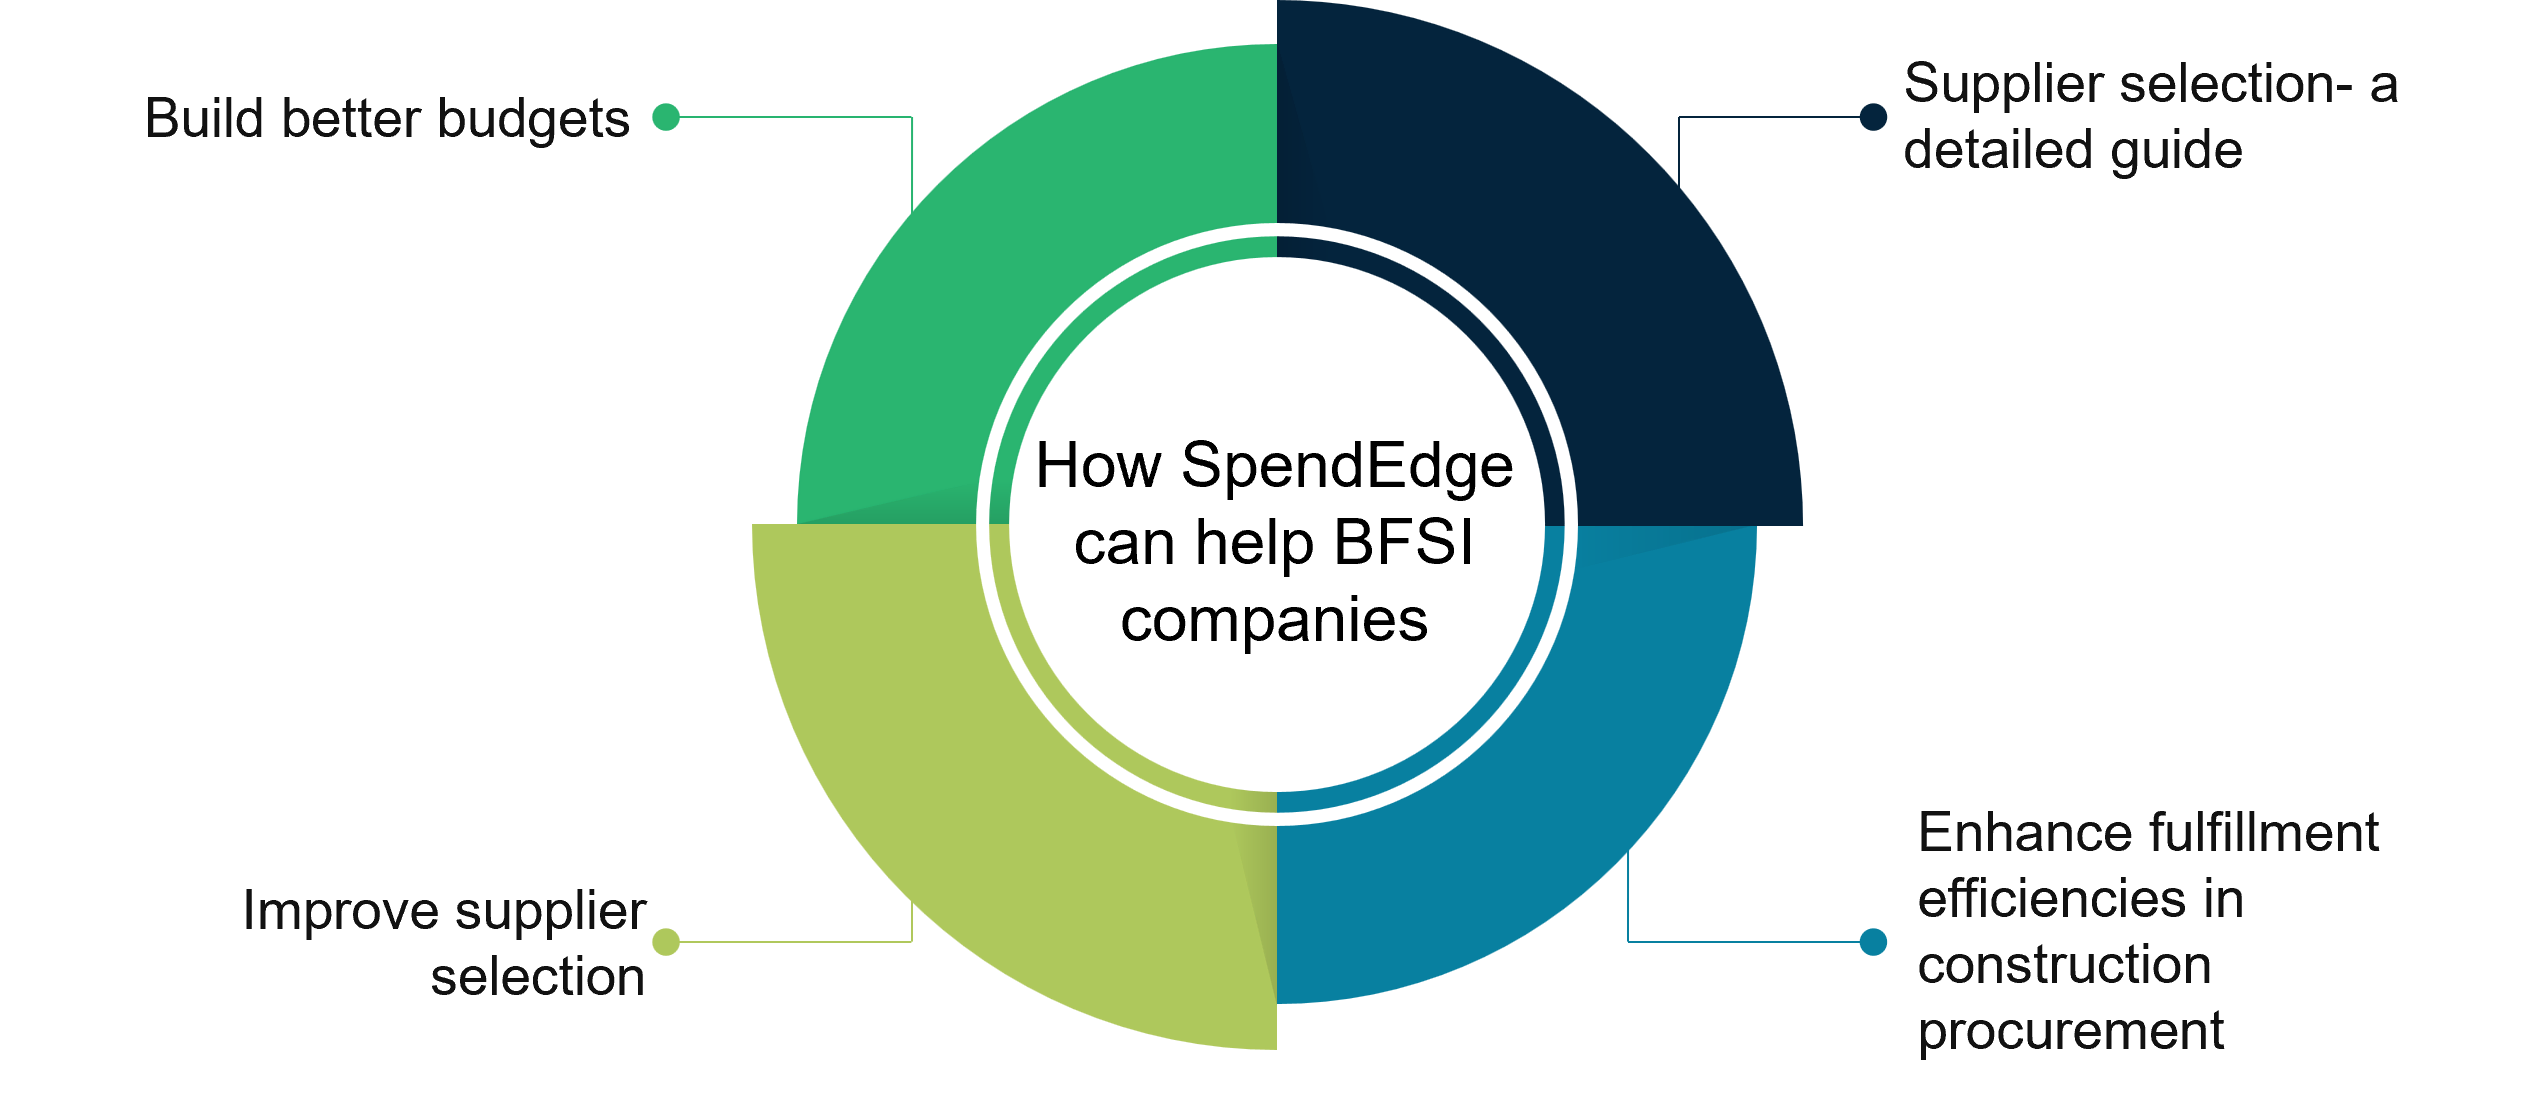 How SpendEdge can help BFSI companies